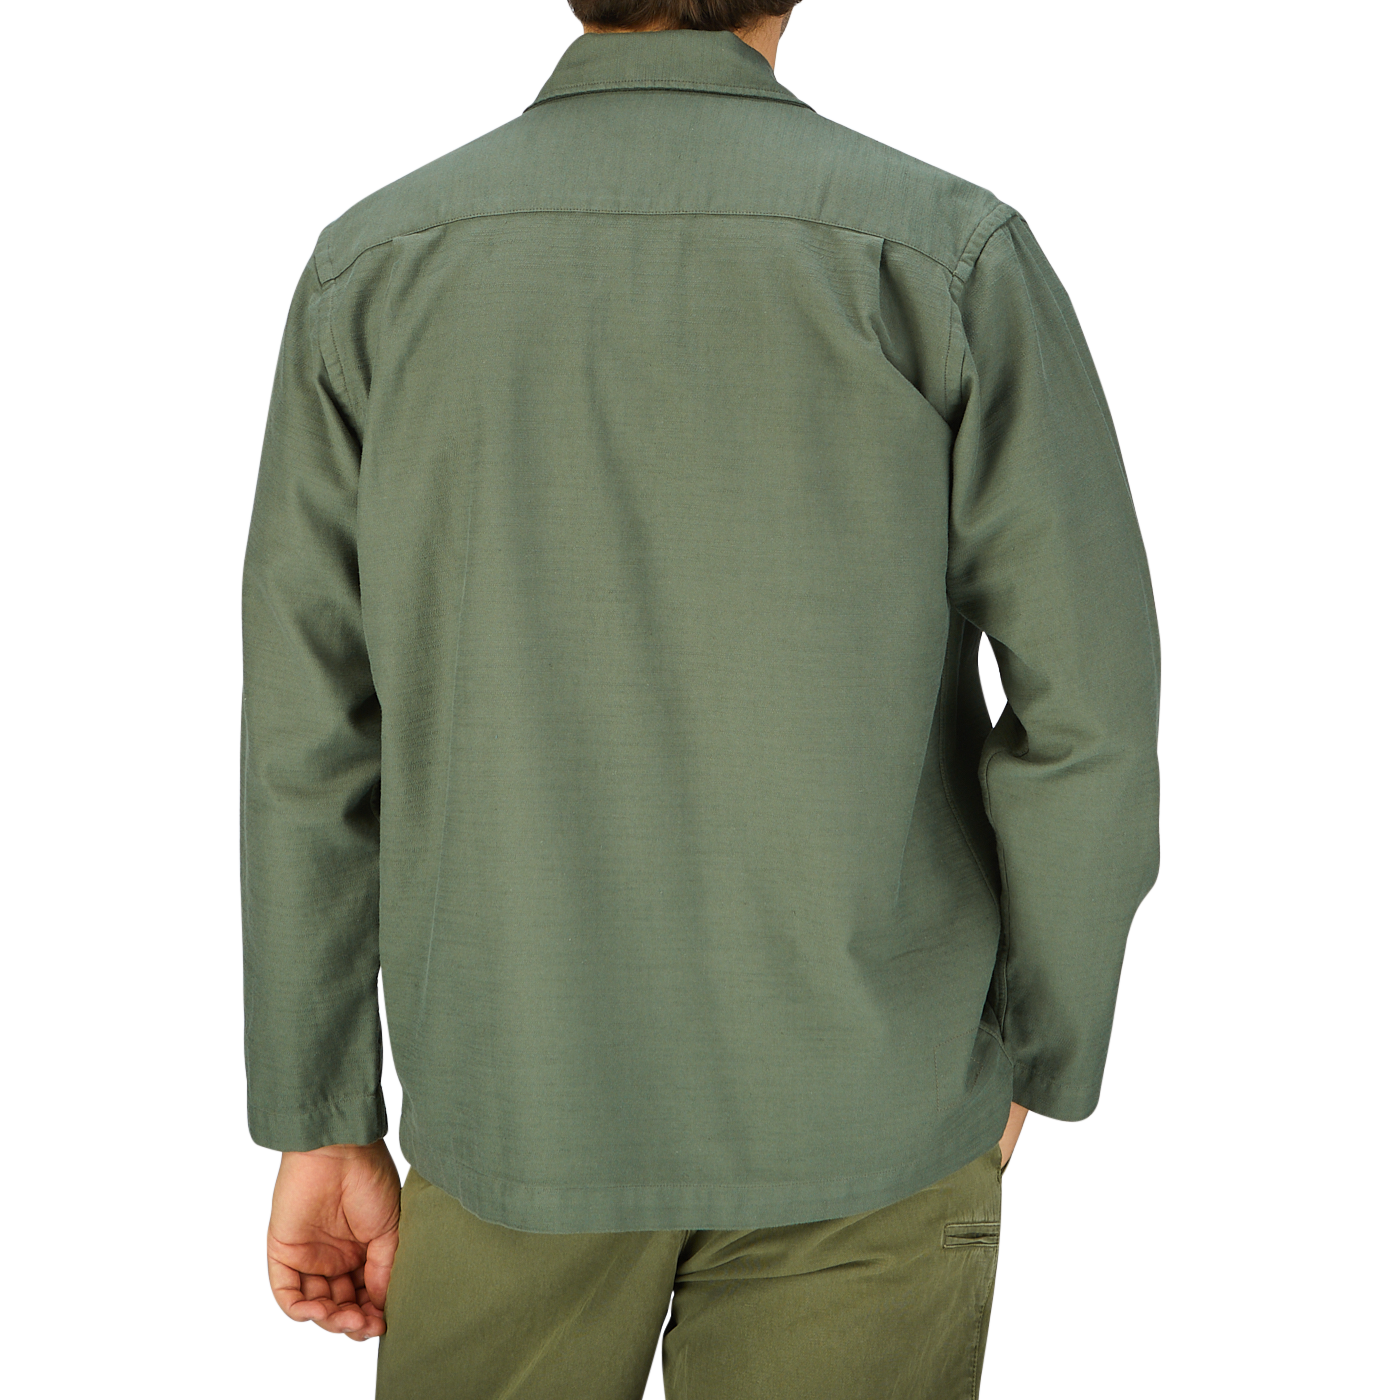 A man wearing a grey Universal Works Olive Green Cotton Sateen Dockside jacket seen from the back.